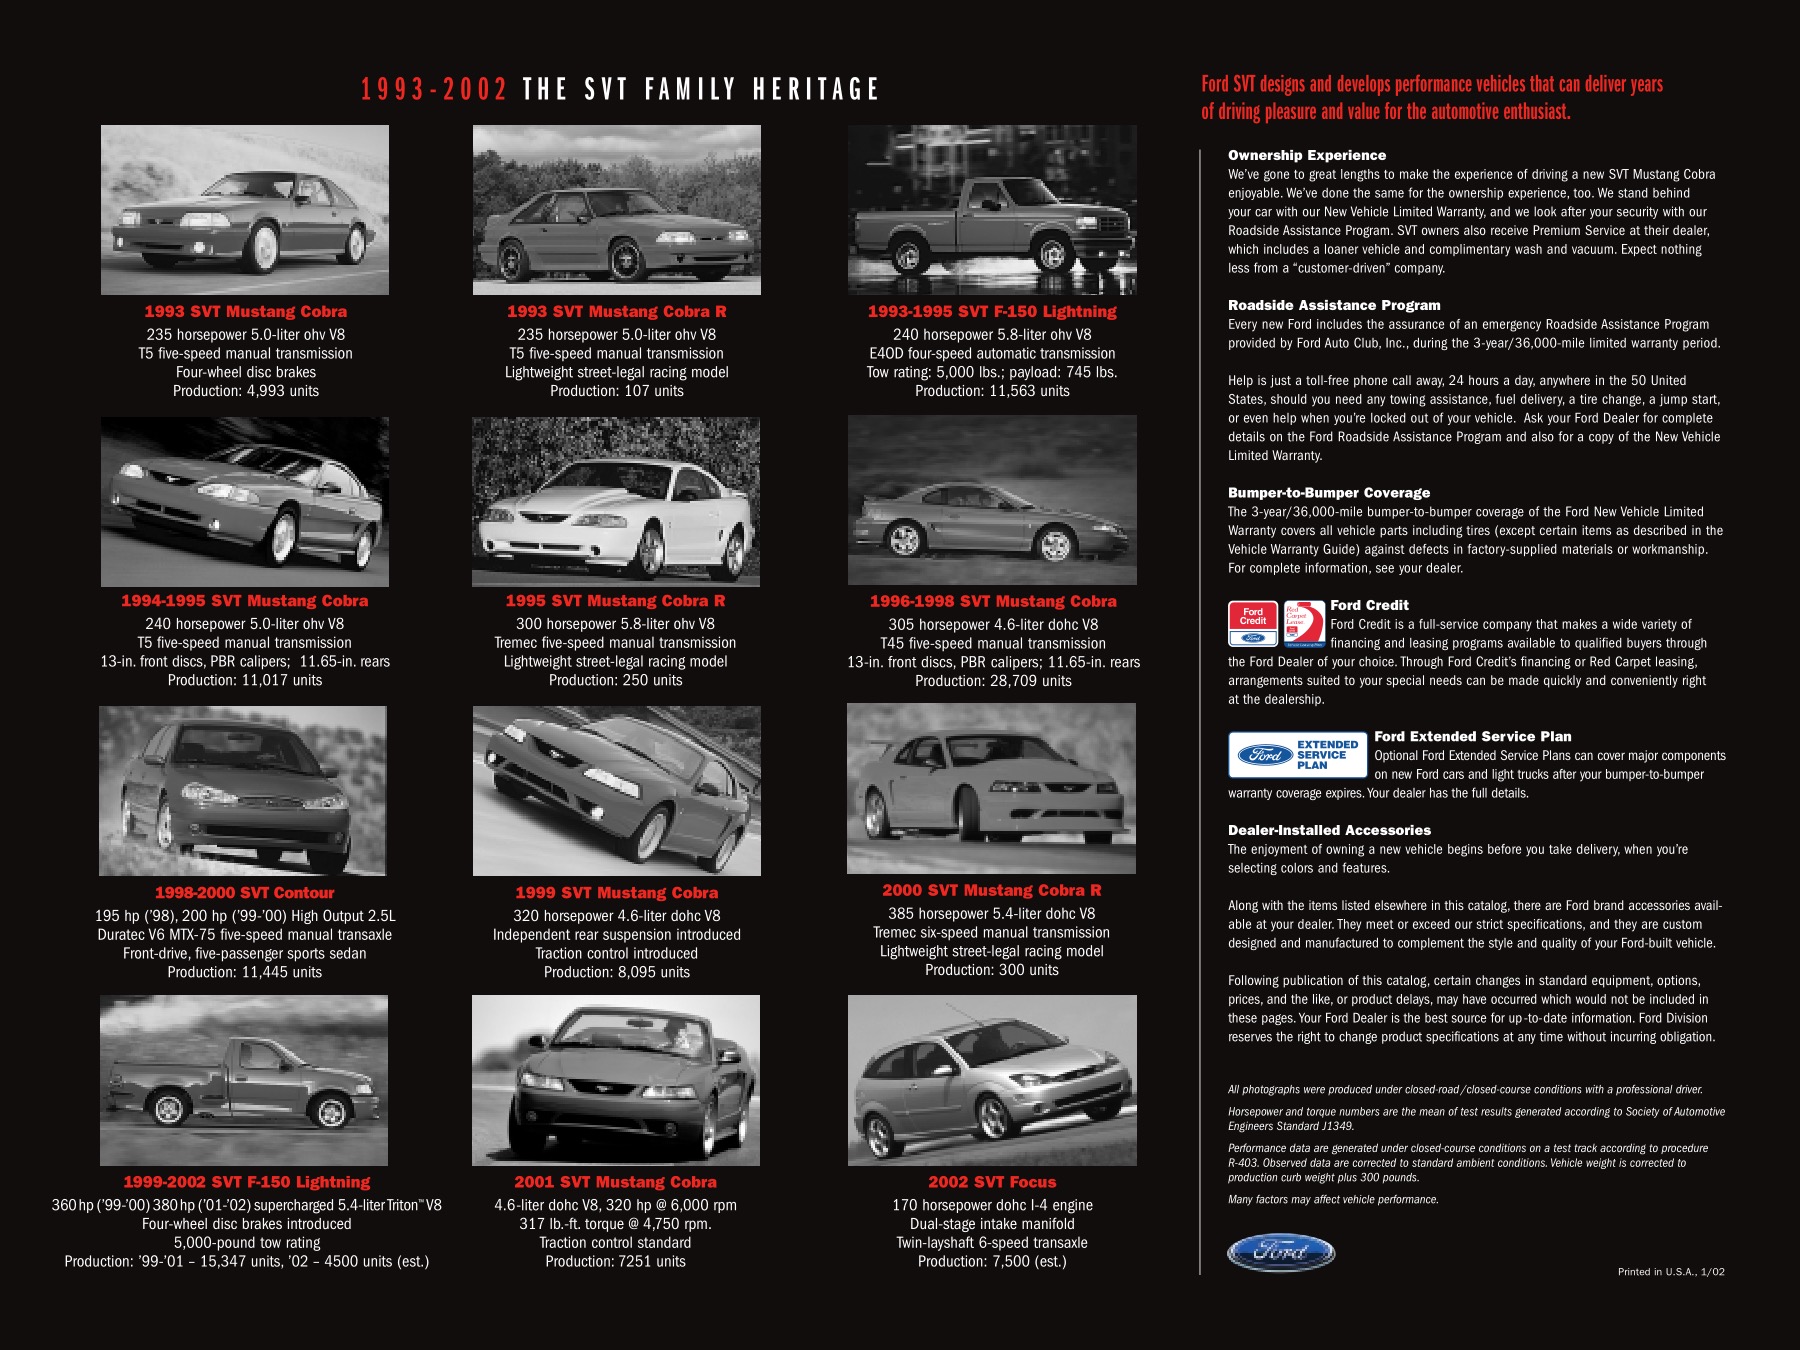 2003 Ford Mustang Cobra Brochure Page 8